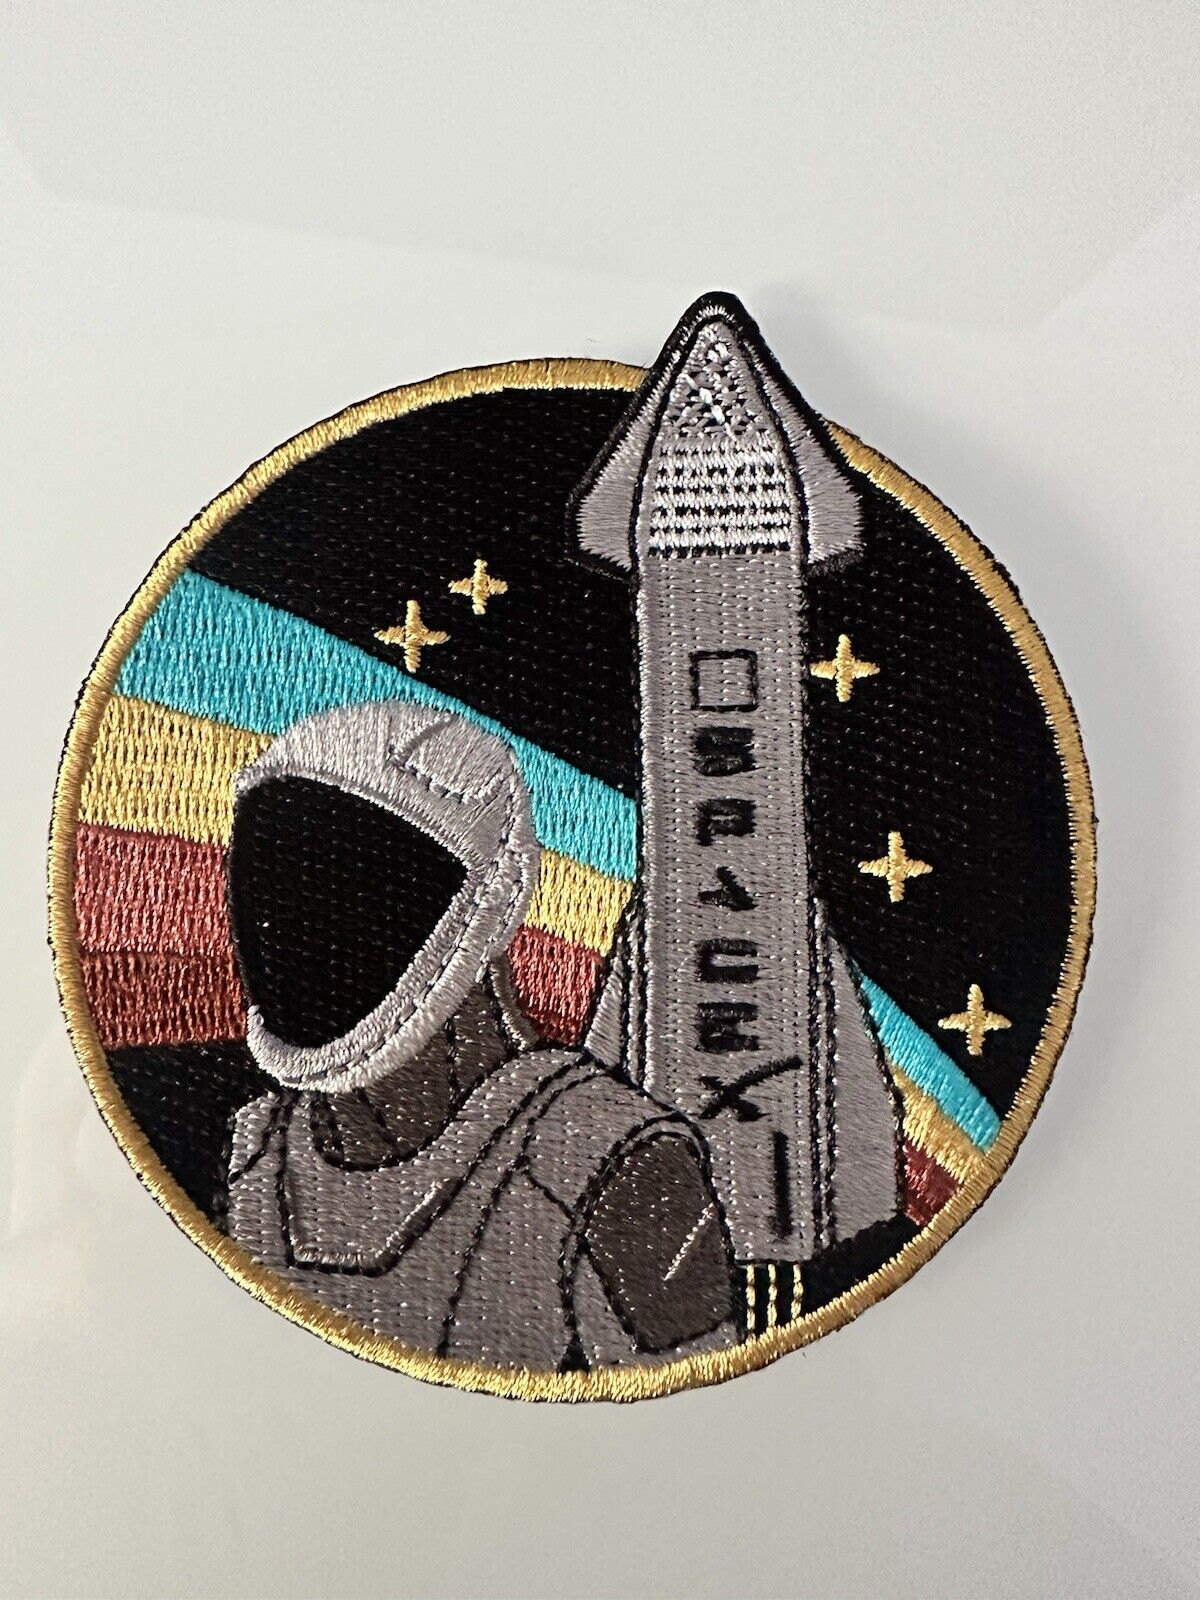 SPACEX ASTRONAUT LOGO PATCH STARSHIP ORBITAL LAUNCH MISSION Patch  3” NASA